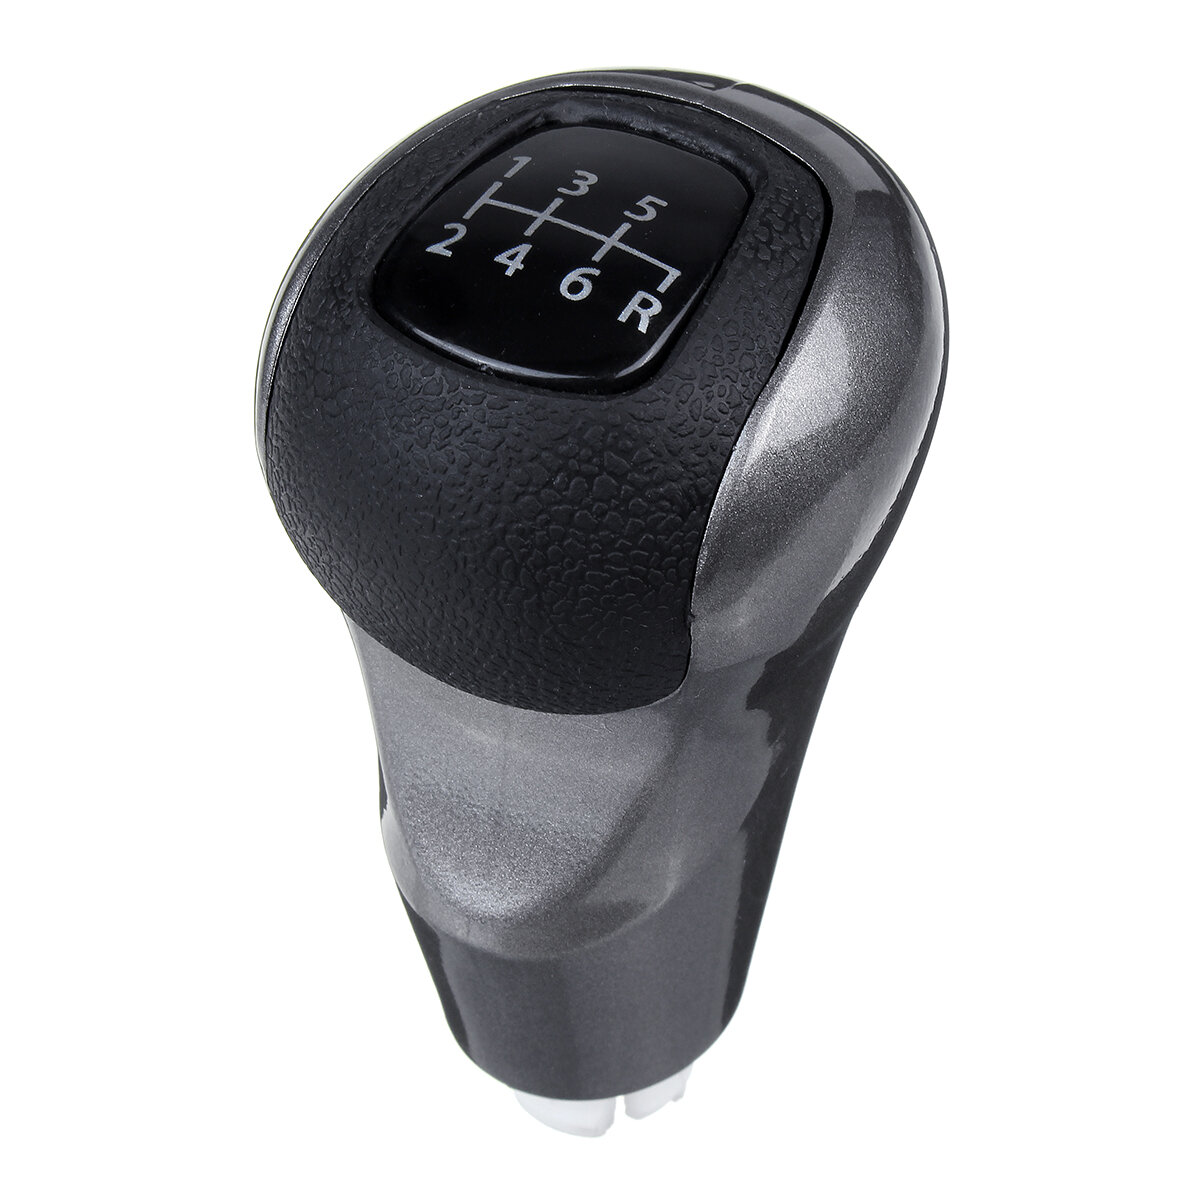 6 Speed Manual Gear Shift Knob Stick Lever Rubber For Honda Civic 2006-2011